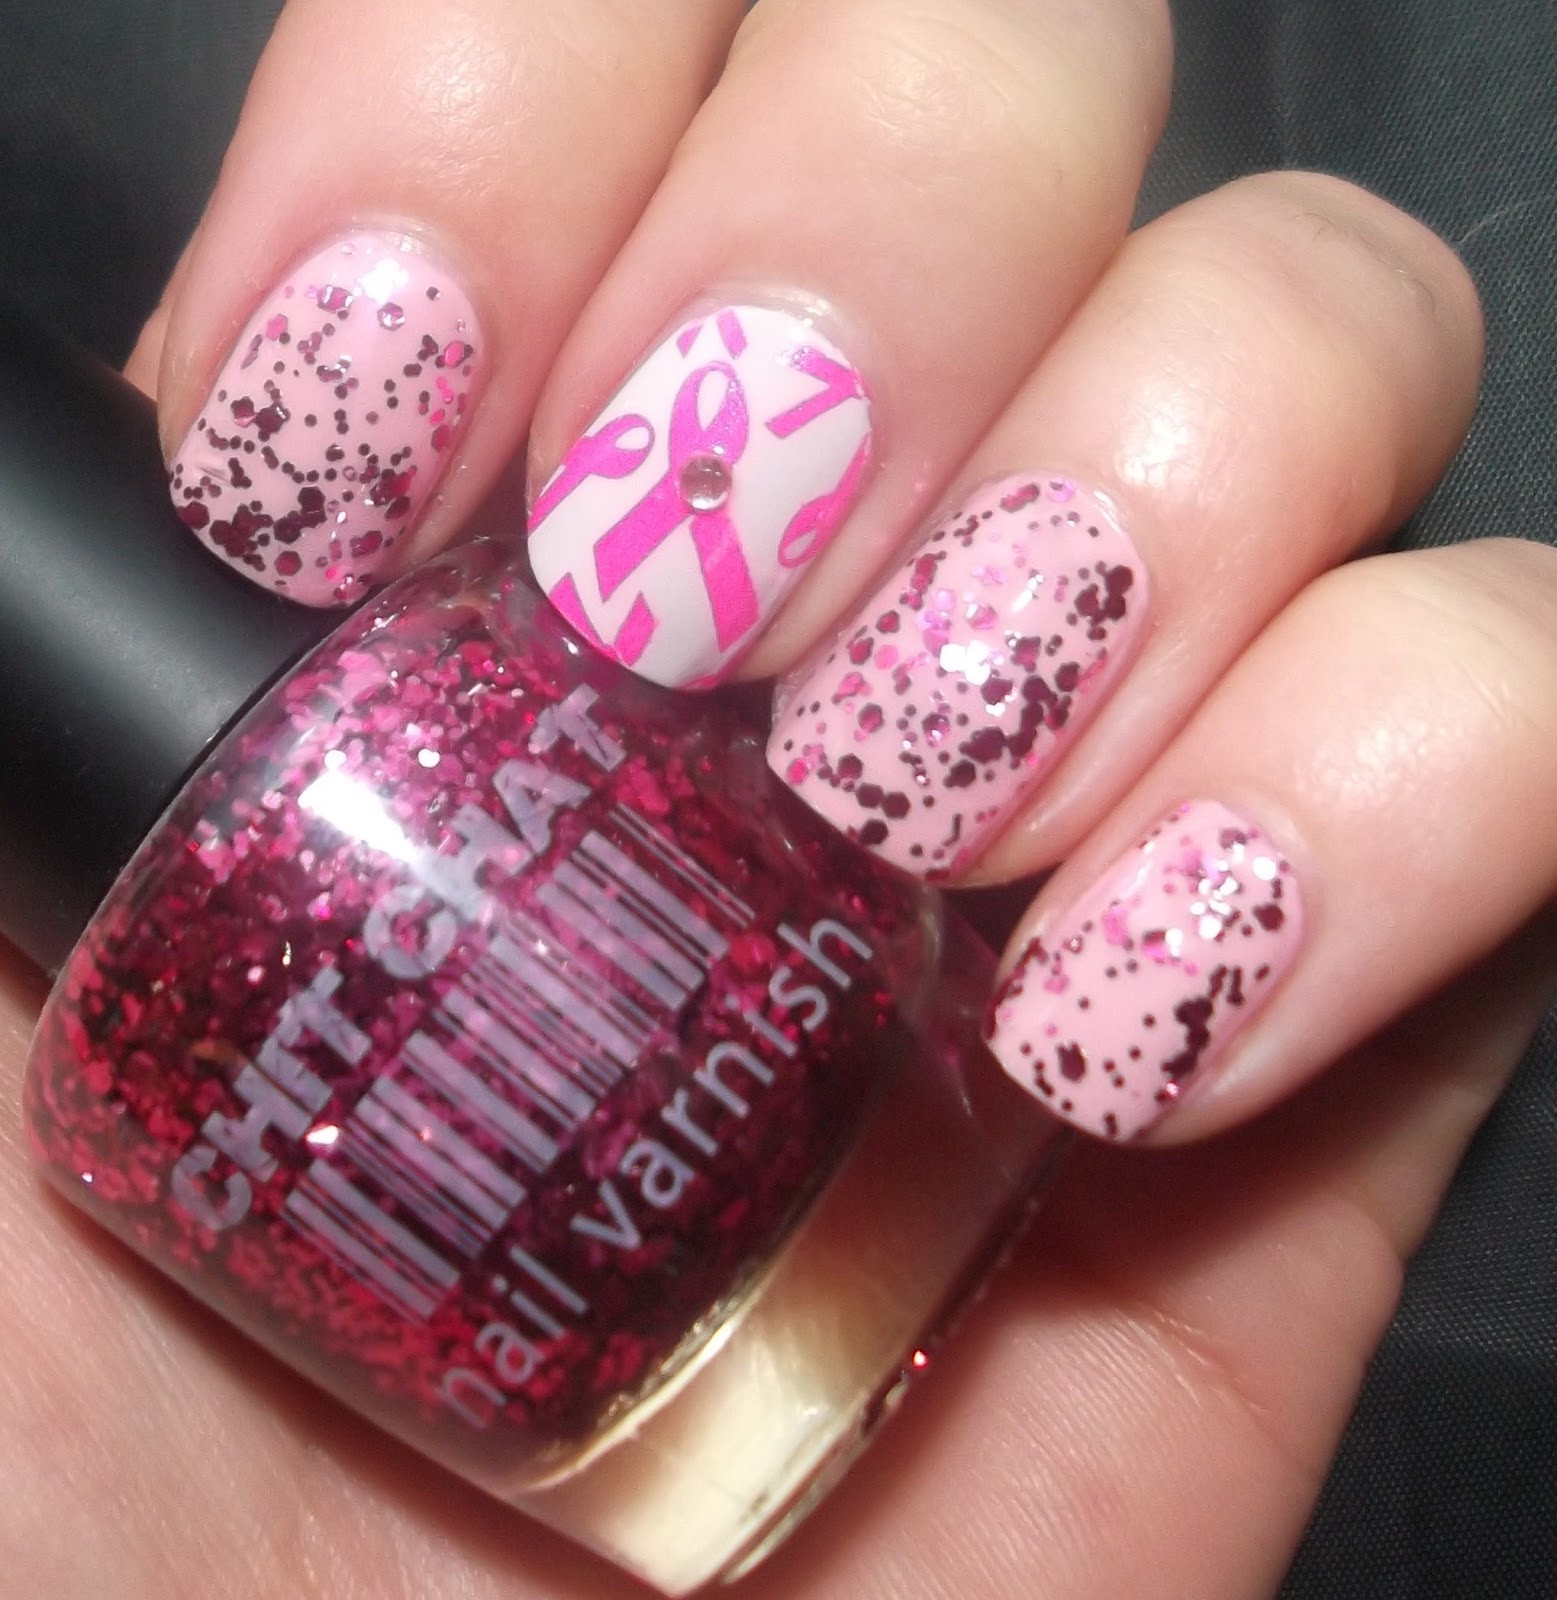 Breast Cancer Nail Art
 Lou is Perfectly Polished Breast Cancer Awareness Nail Art